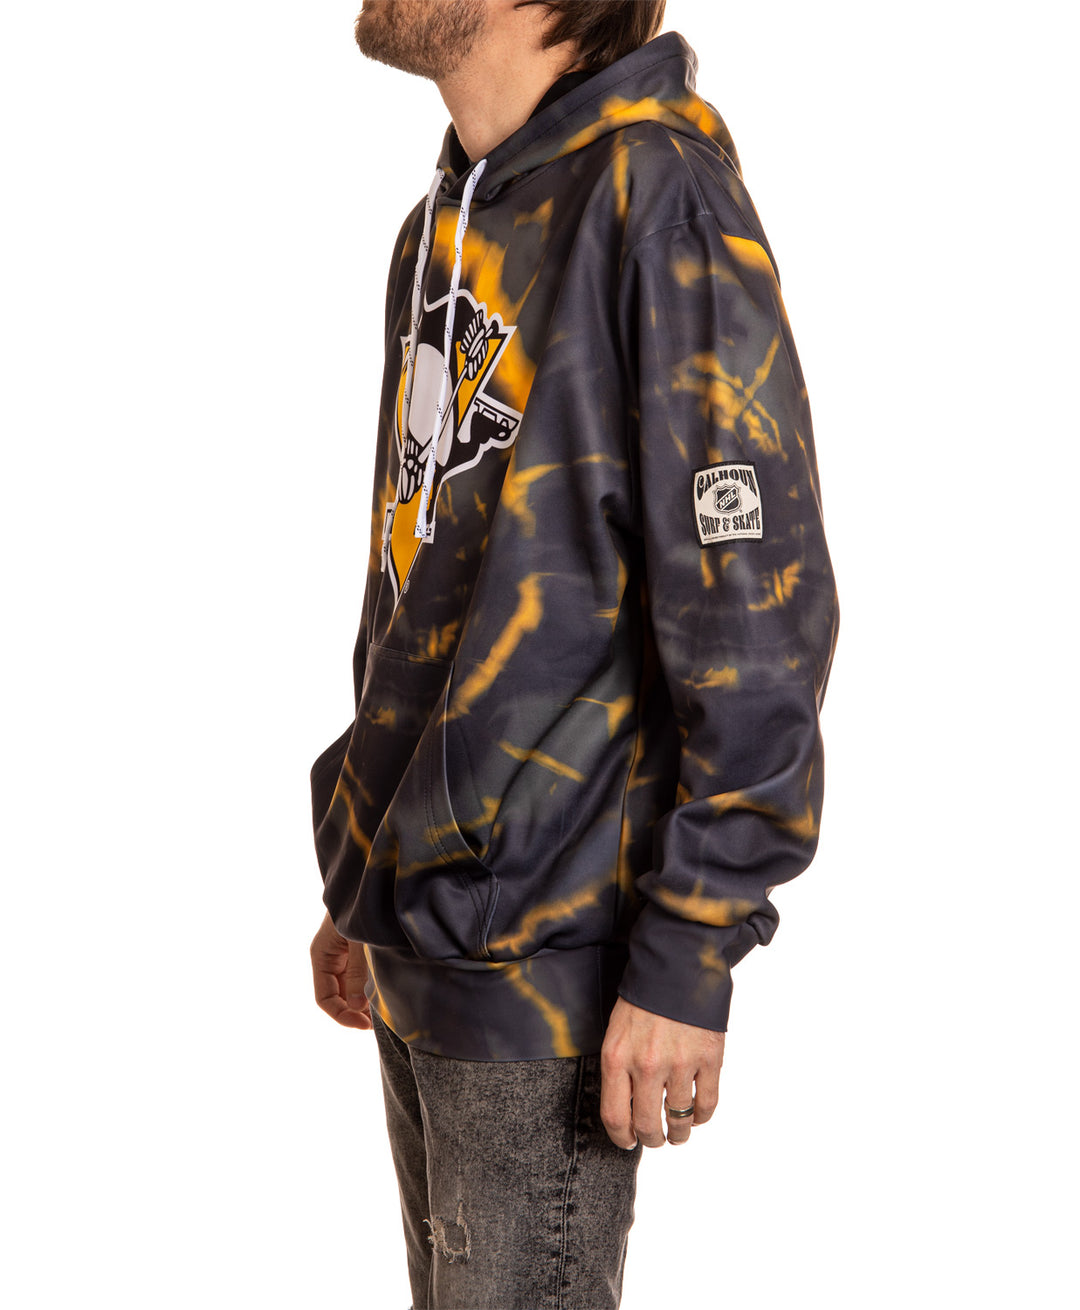 Official NHL Licensed Pittsburgh Penguins Tie Dye Sublimation Hoodie